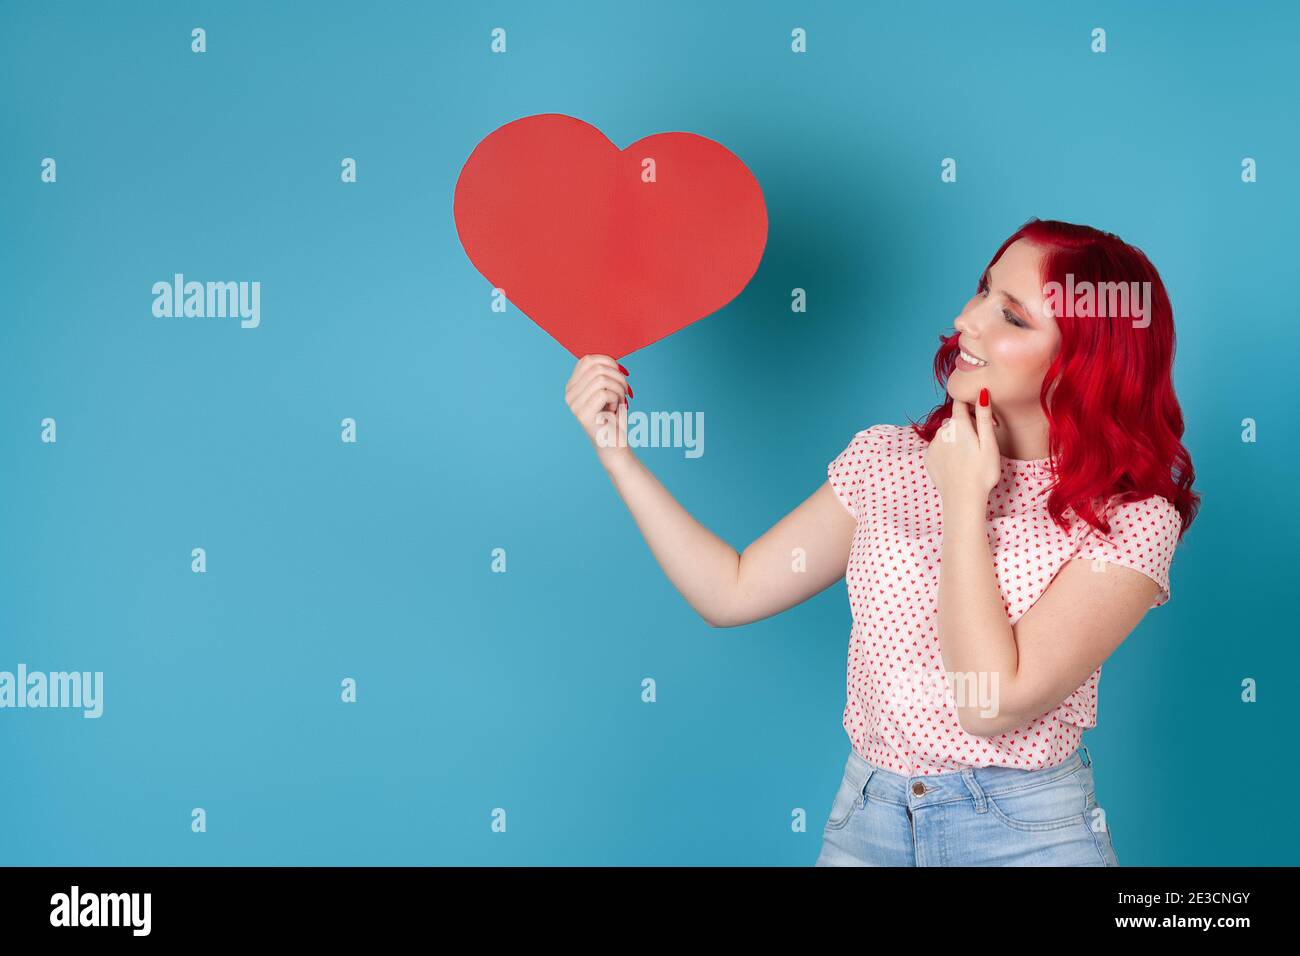 a dreamy contented young woman with red hair holds a red paper heart and scratches her chin with her hand , isolated on a blue background Stock Photo